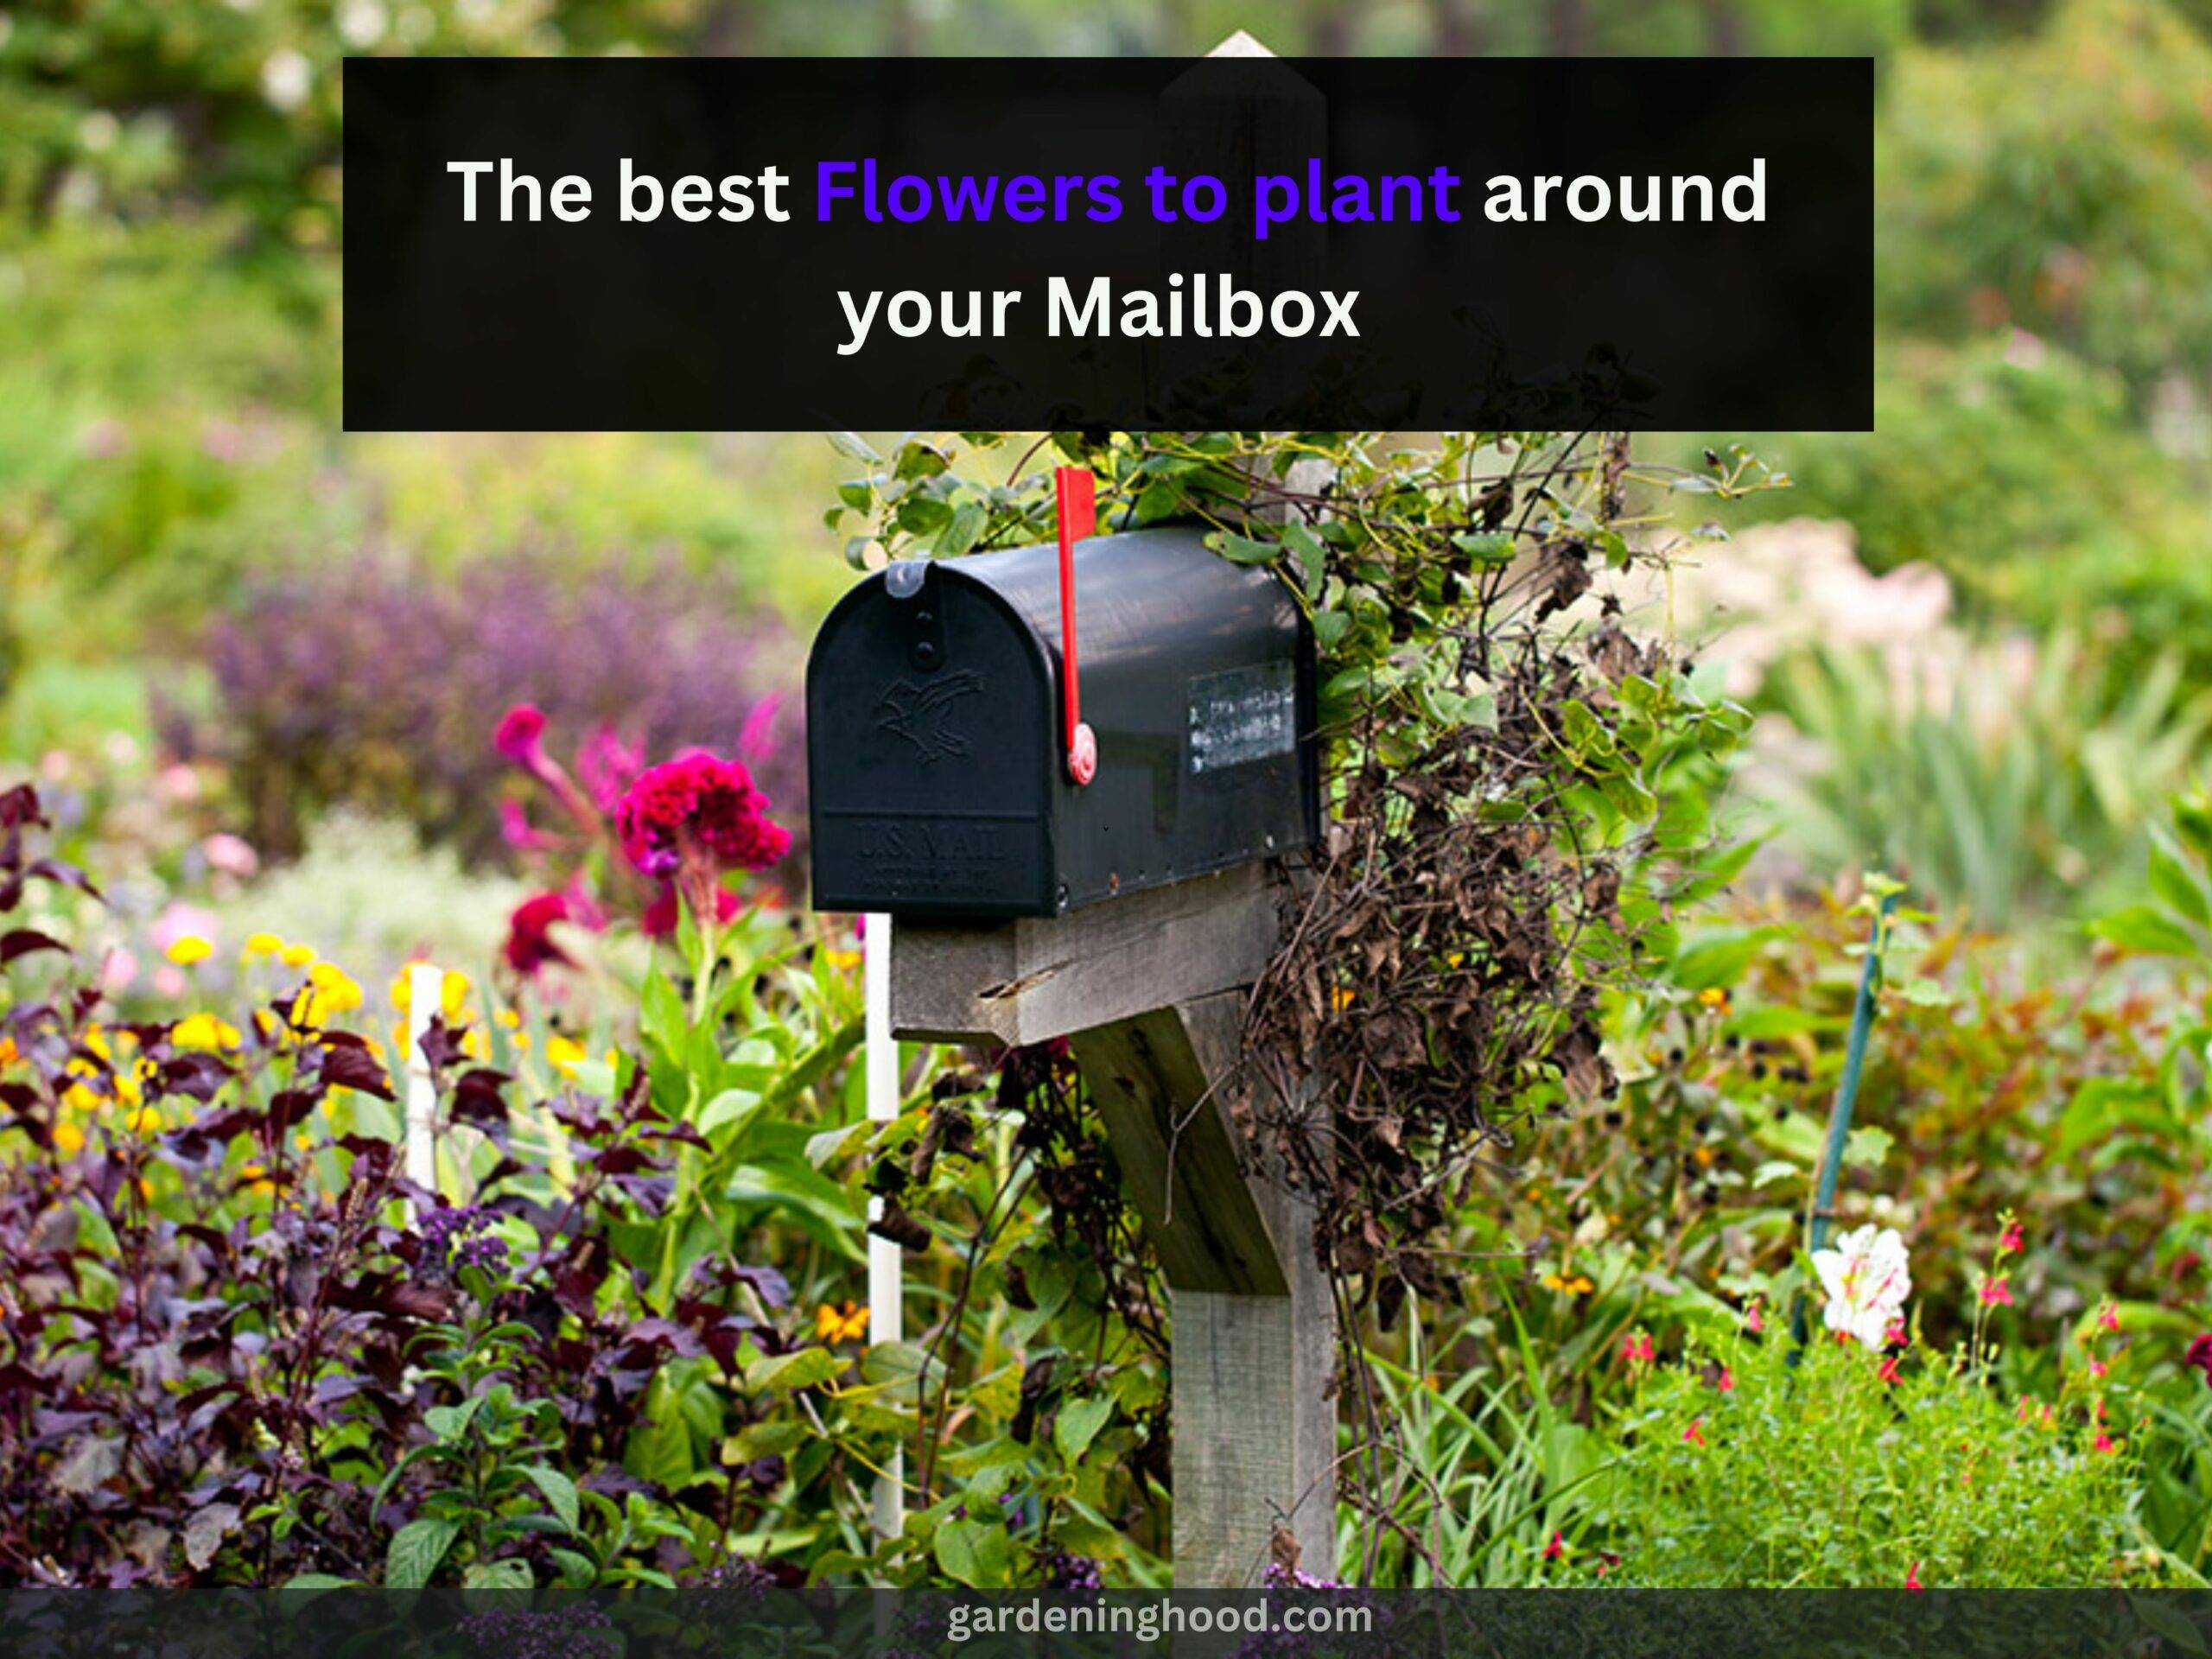 The best Flowers to plant around your Mailbox